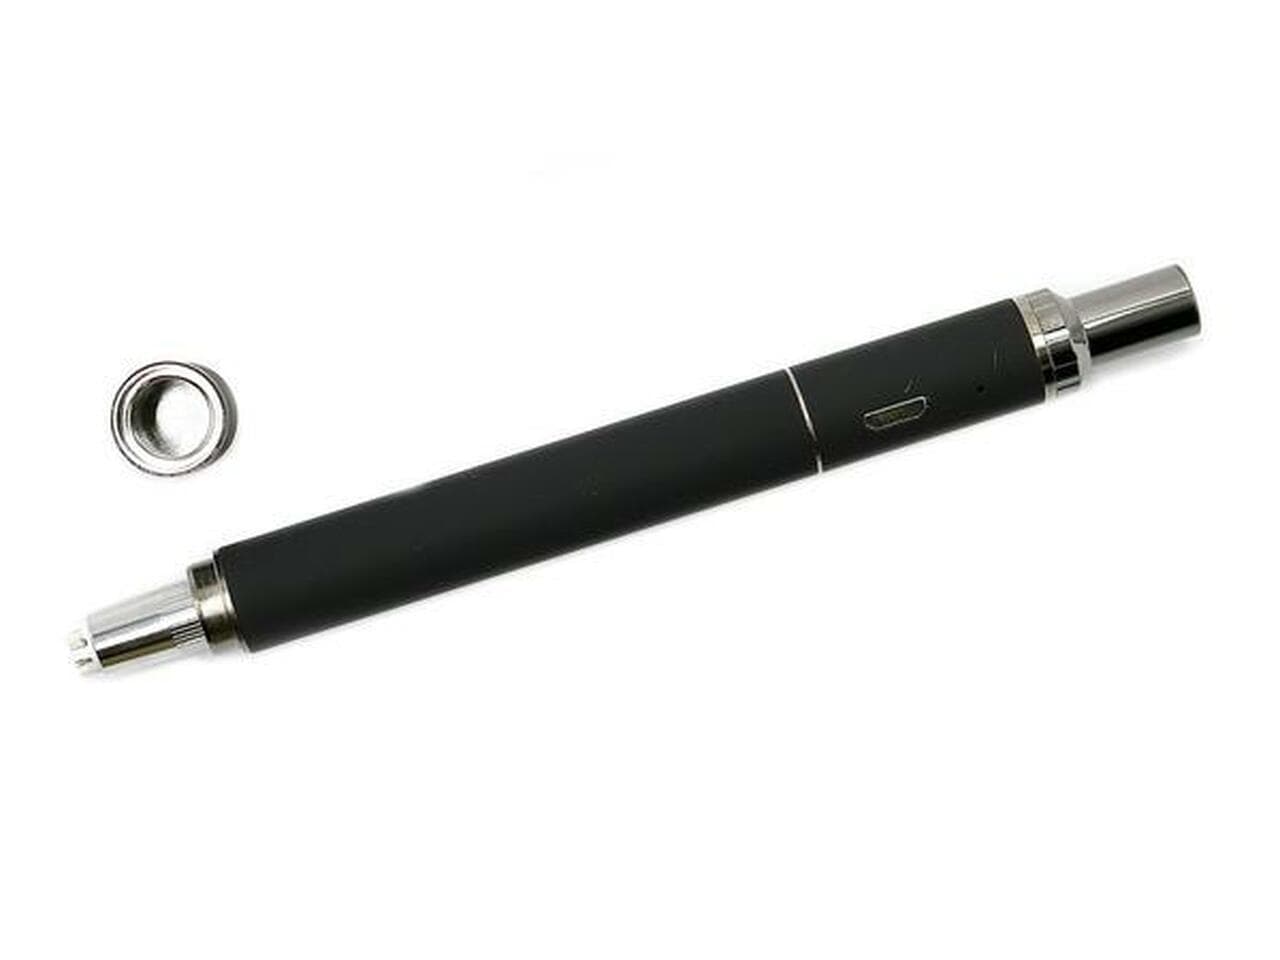 Boundless Terp Pen - Discreet and Efficient, Wax/Concentrate Dab